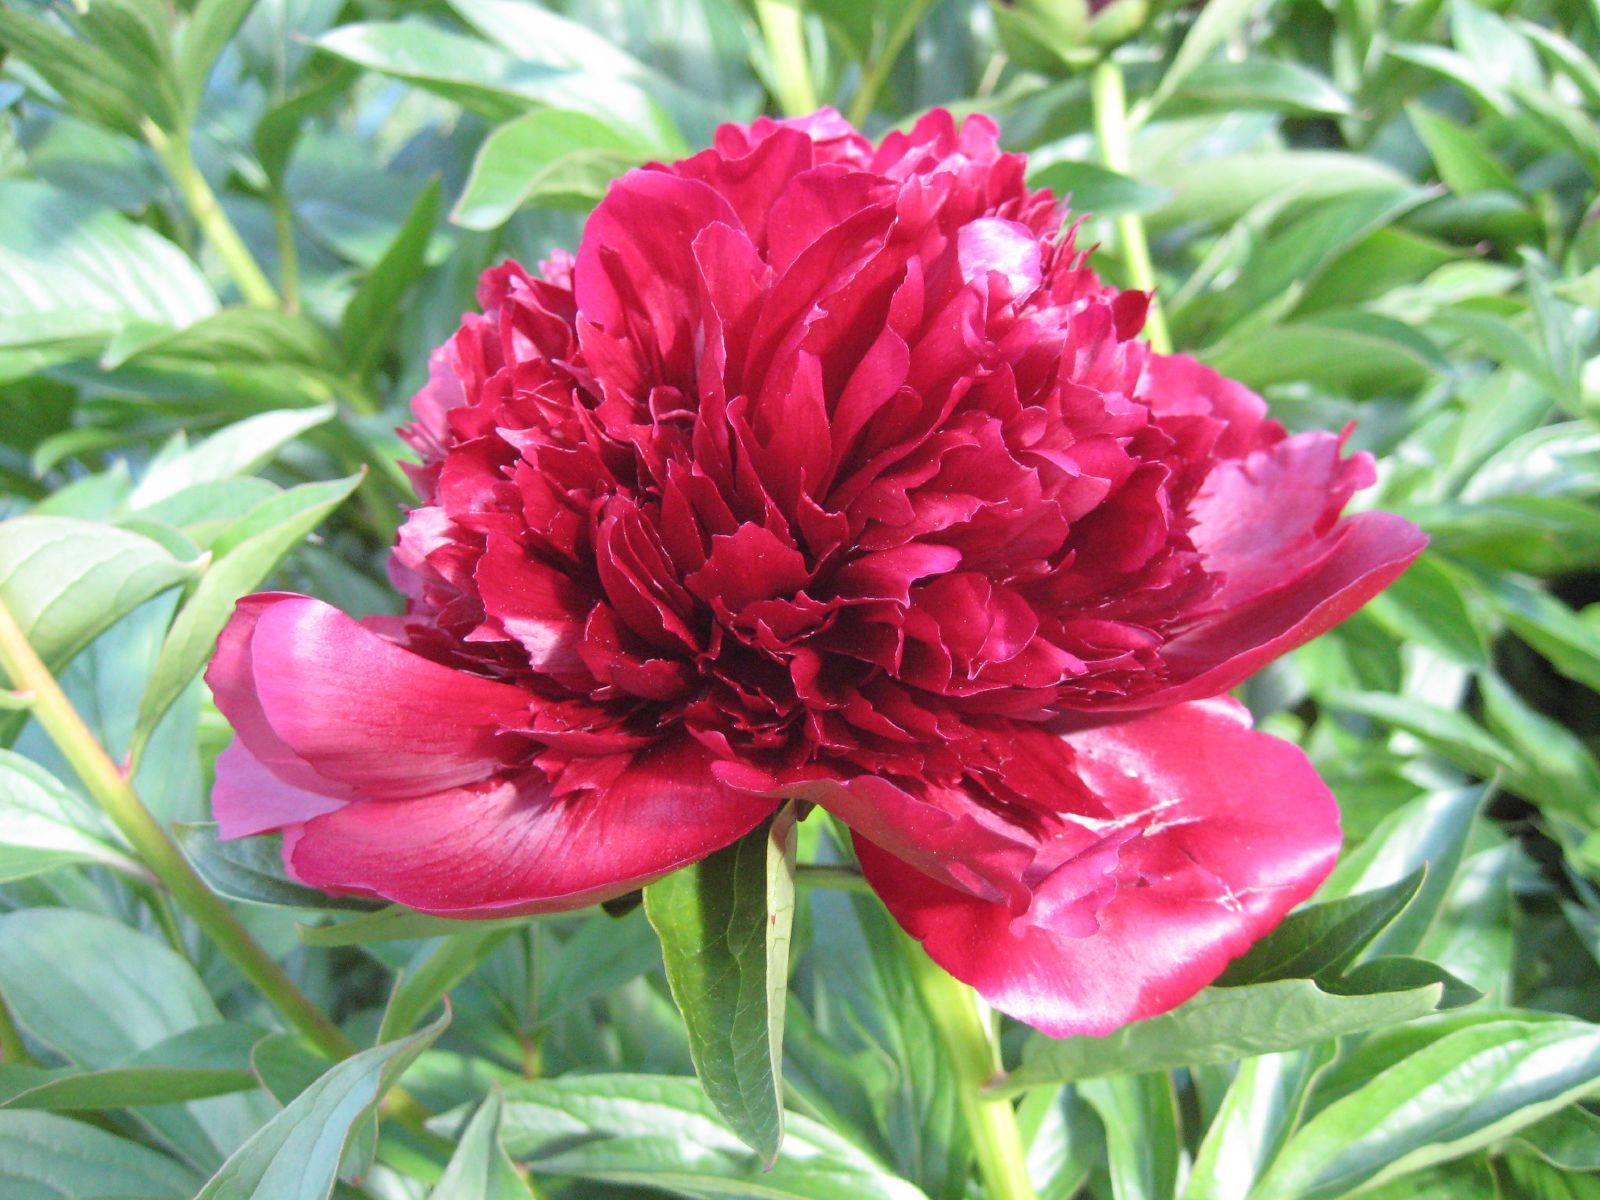 red flower with green leaves and stems